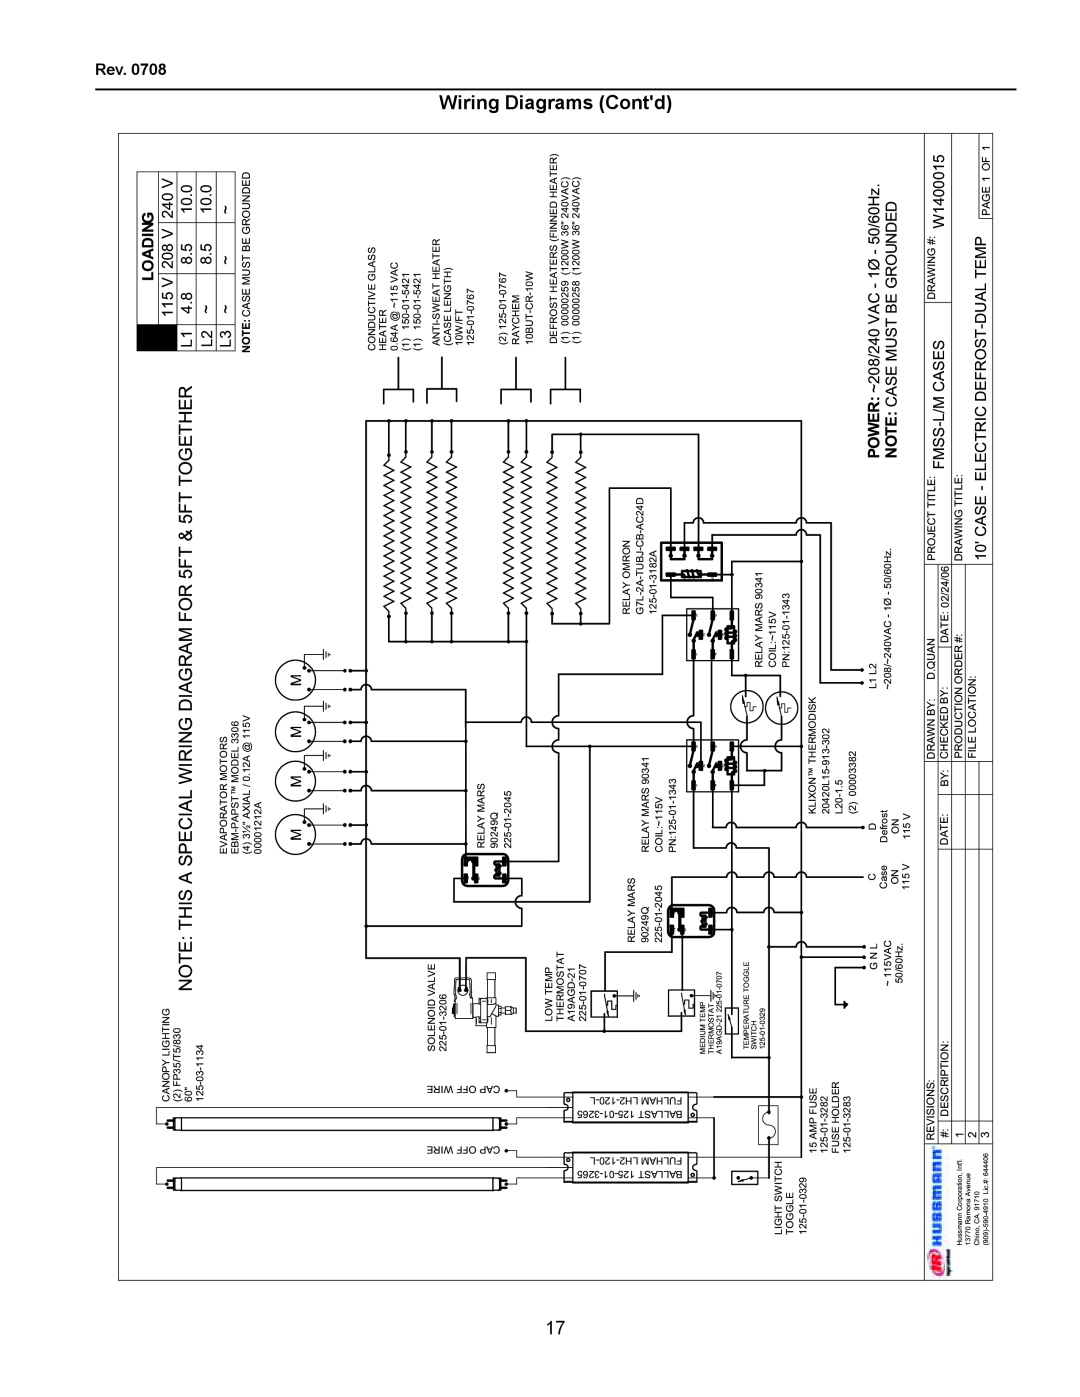 hussman FMSS-L NOTE THIS A SPECIAL WIRING DIAGRAM FOR 5FT & 5FT TOGETHER, Loading, Defrost Heaters Finned Heater 